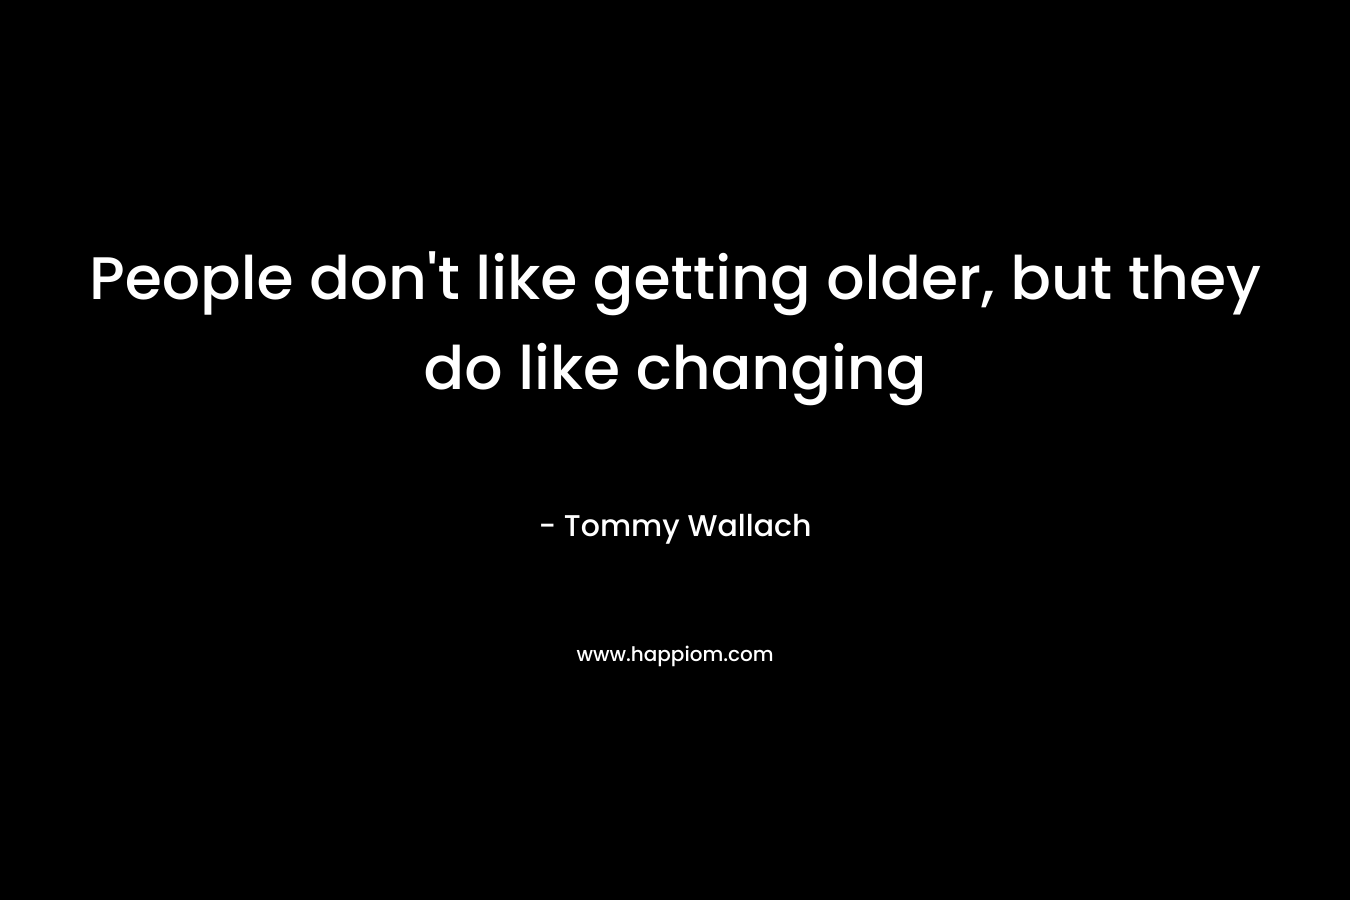 People don't like getting older, but they do like changing